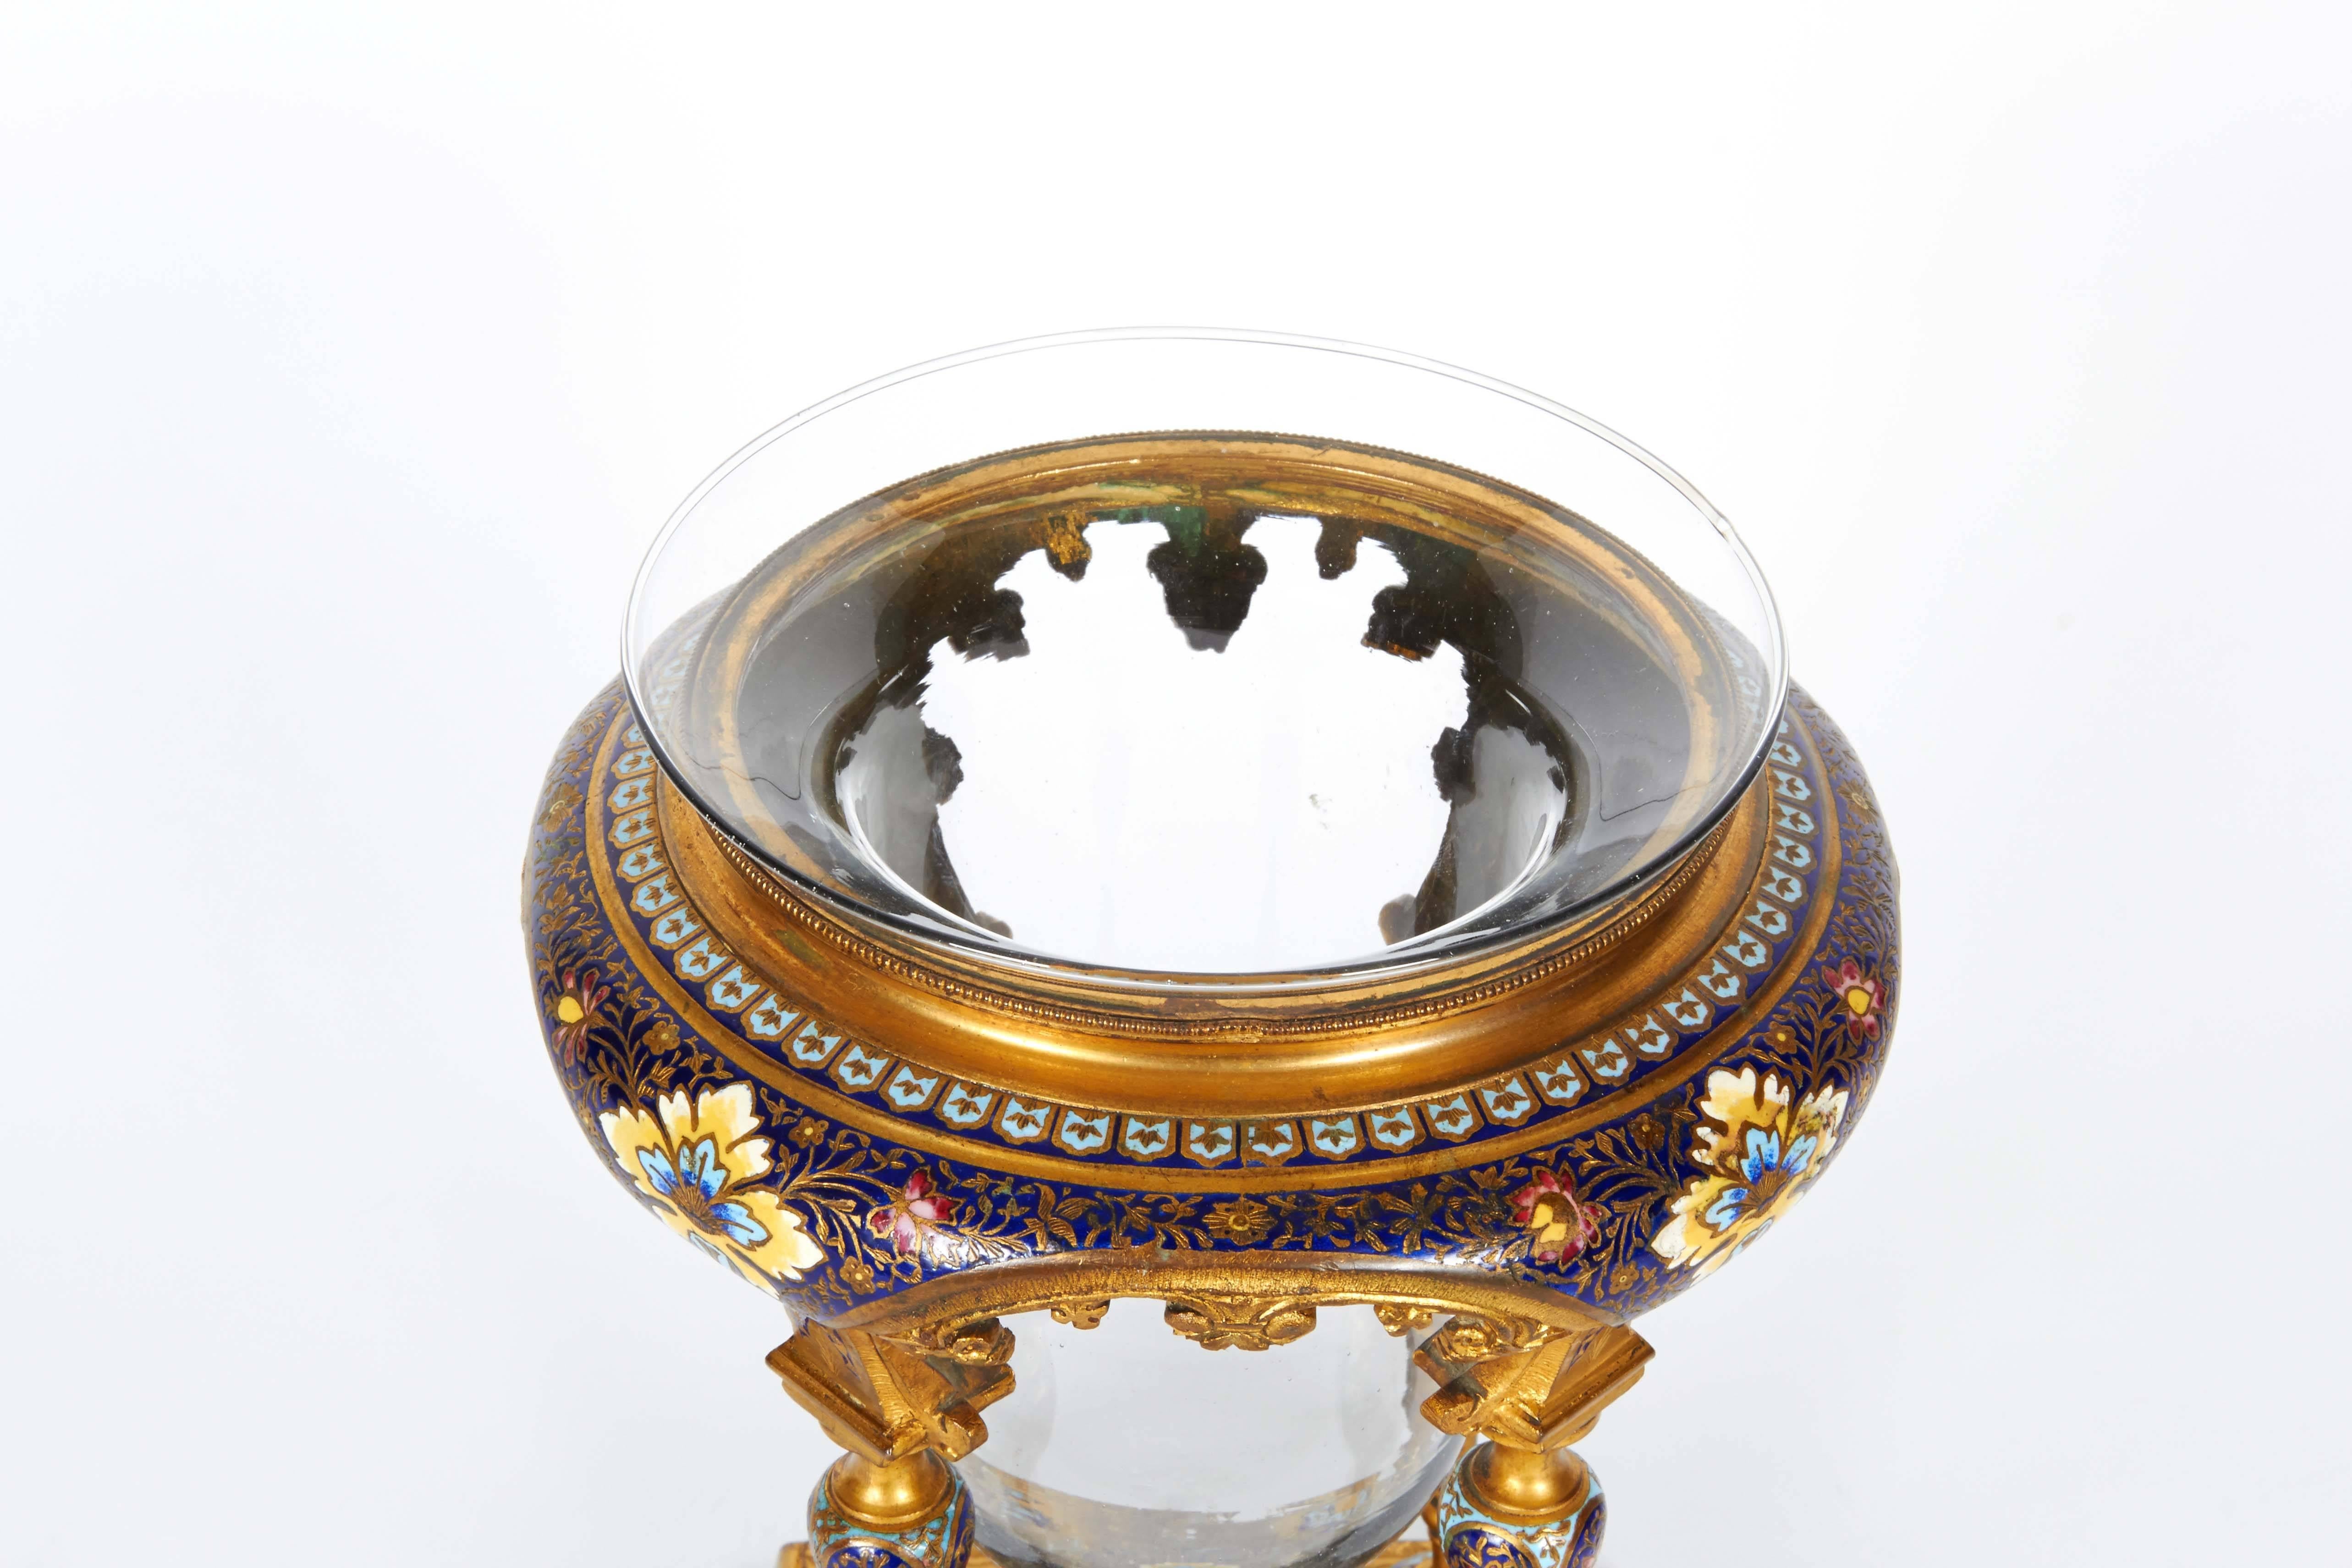 19th Century French Ormolu and Champleve Cloisonne Enamel Glass Candle Holder Moorish Style